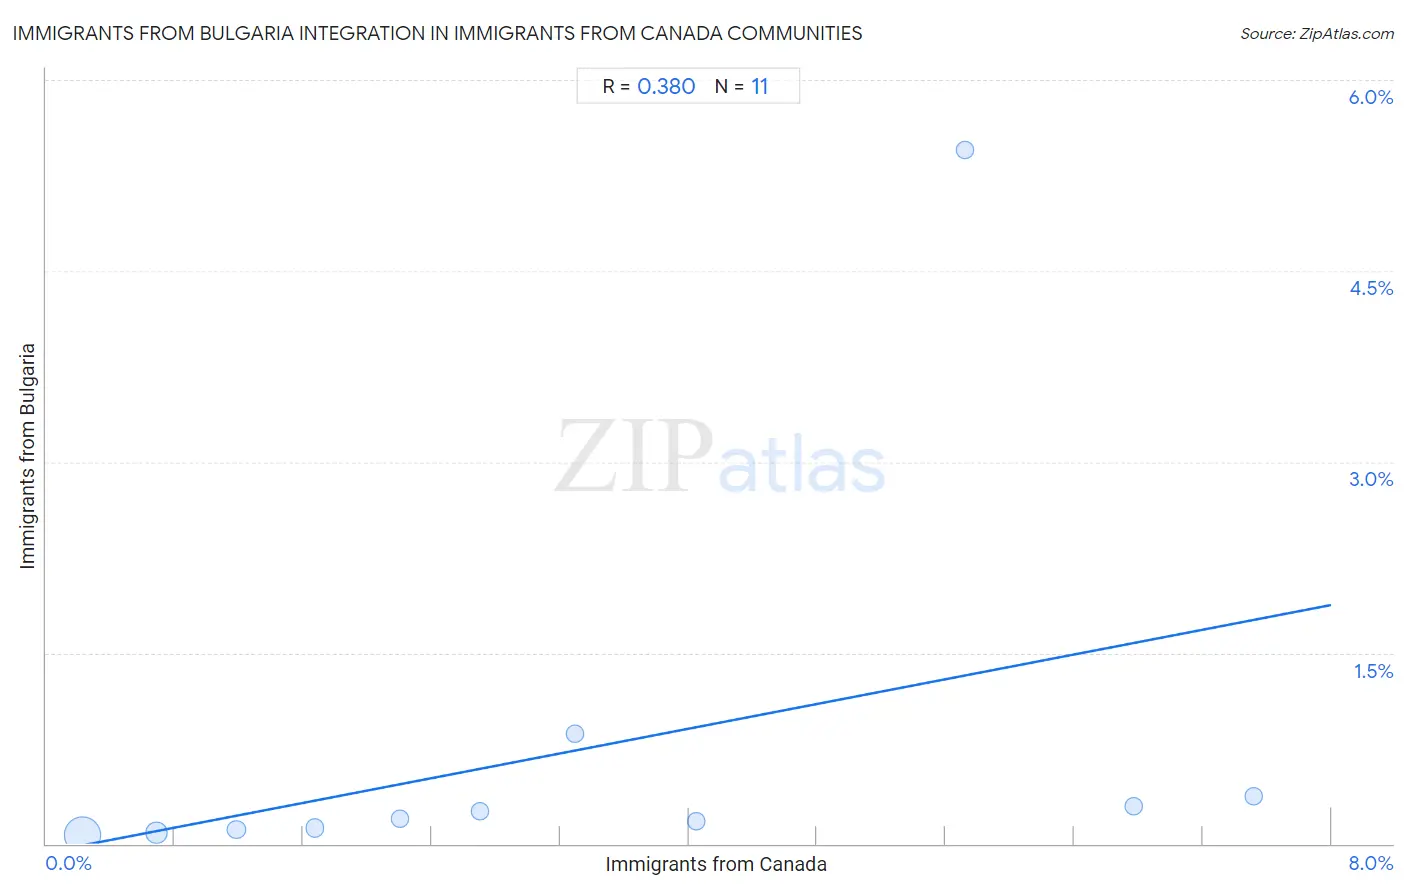 Immigrants from Canada Integration in Immigrants from Bulgaria Communities